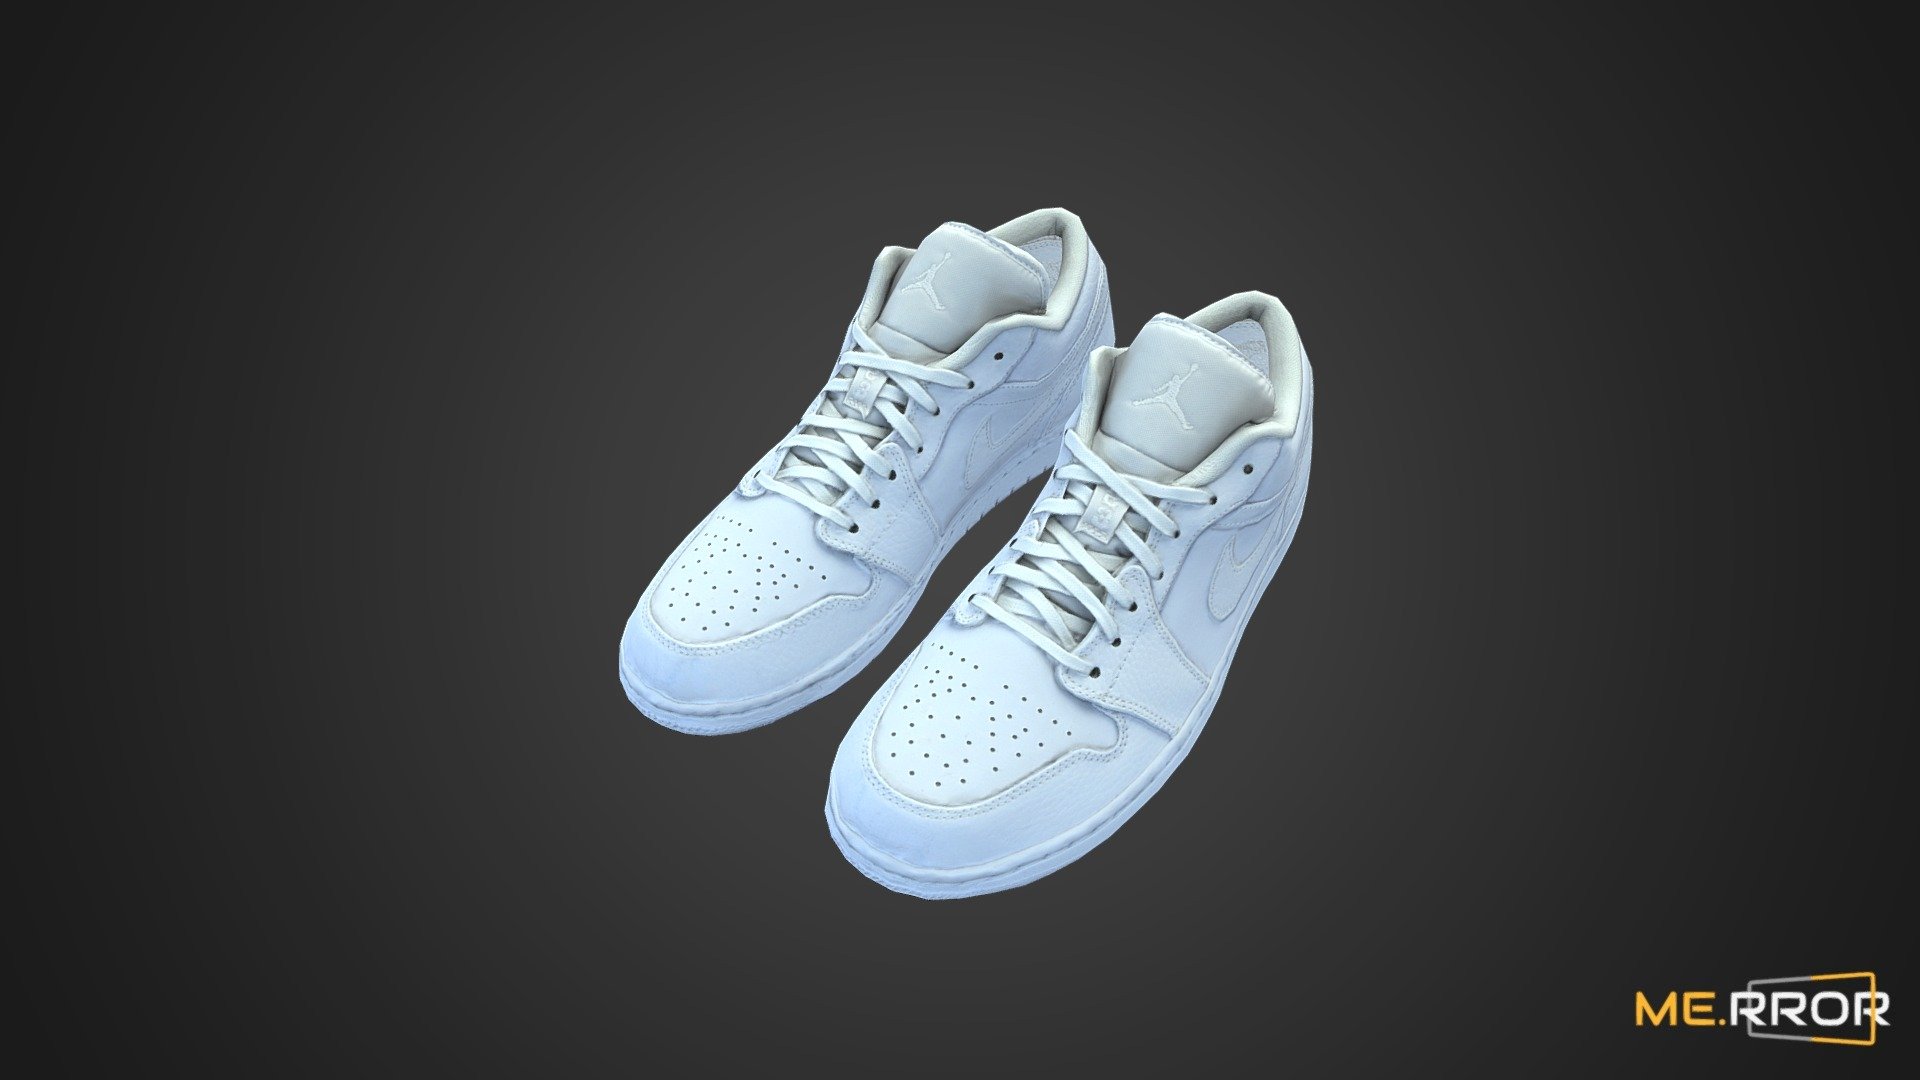 MERROR is a 3D Content PLATFORM which introduces various Asian assets to the 3D world


3DScanning #Photogrametry #ME.RROR - [Game-Ready] White Sneakers - Buy Royalty Free 3D model by ME.RROR (@merror) 3d model